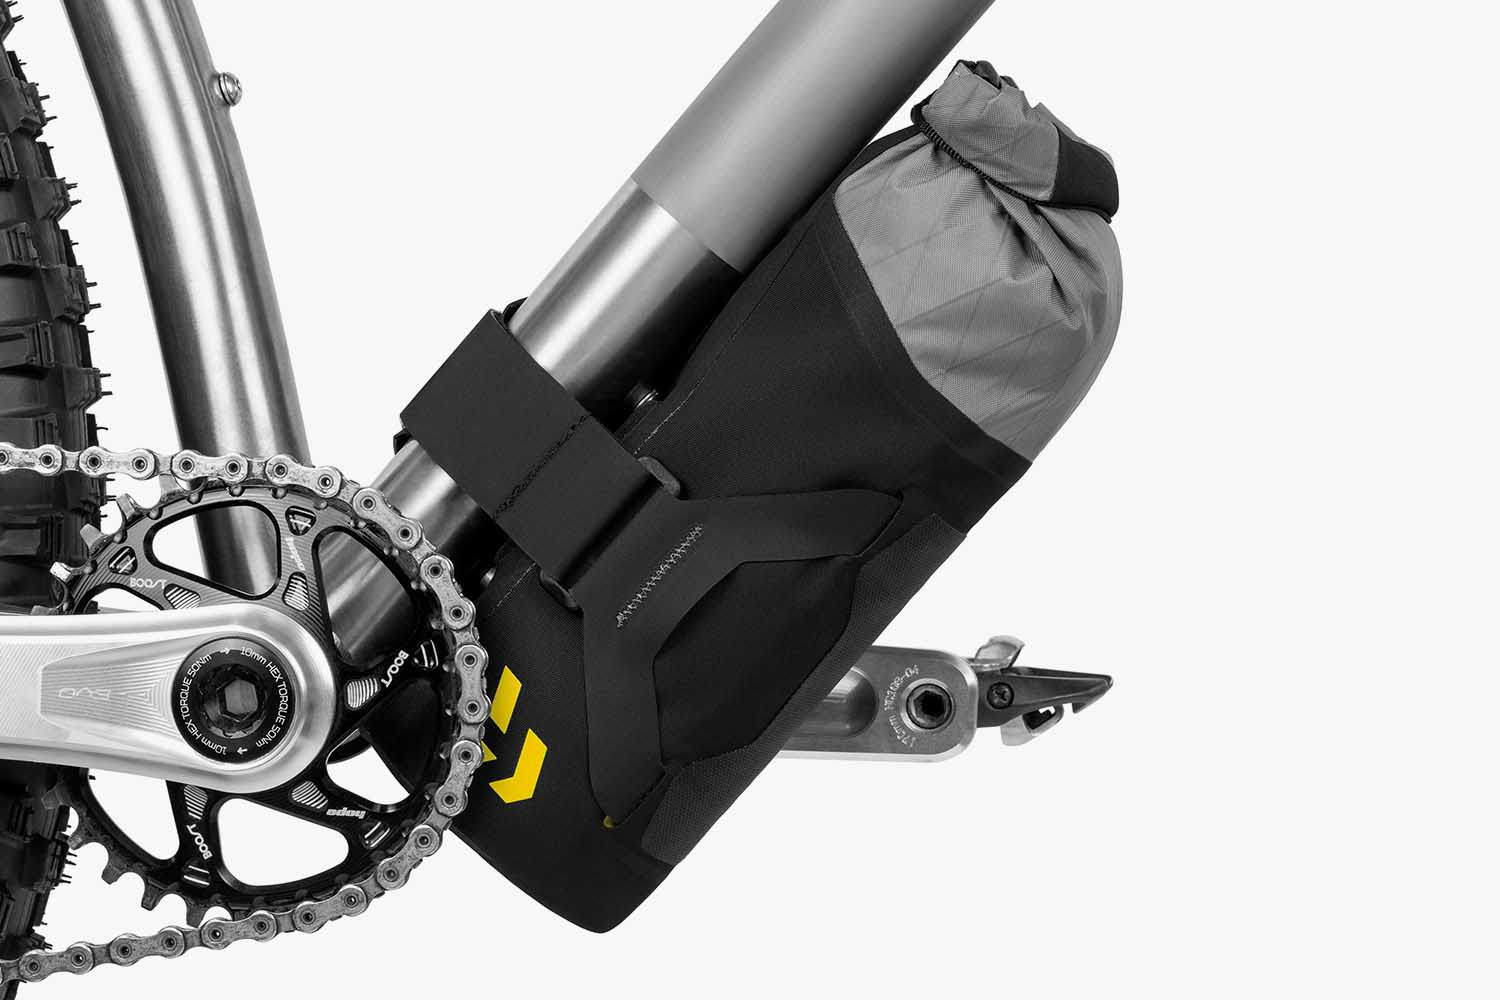 Apidura Downtube Pack on bike bar from the side with a white background